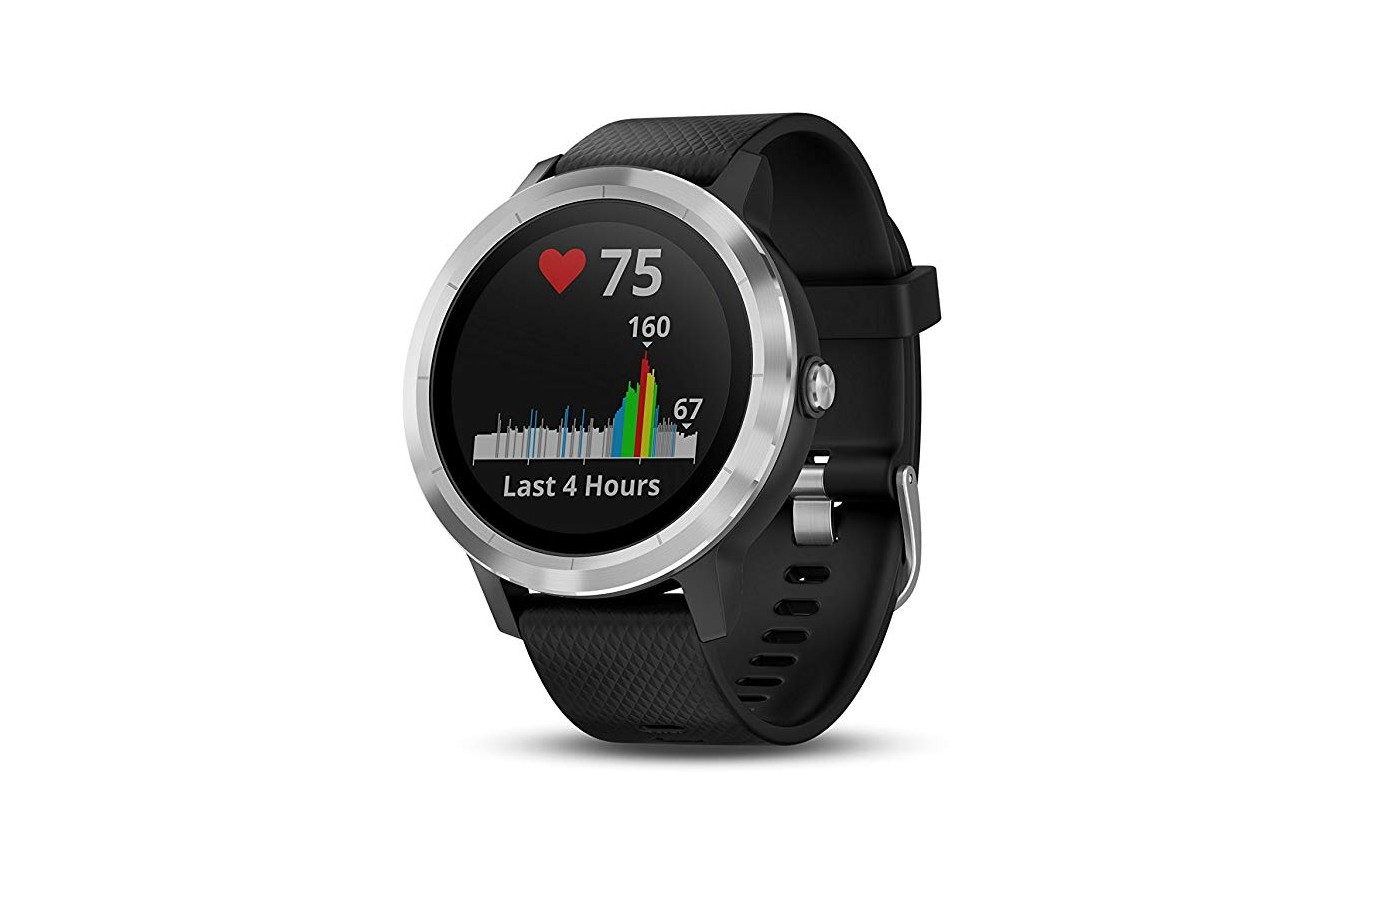 In addition to those basics, the Vivoactive 3 has much more to offer. 